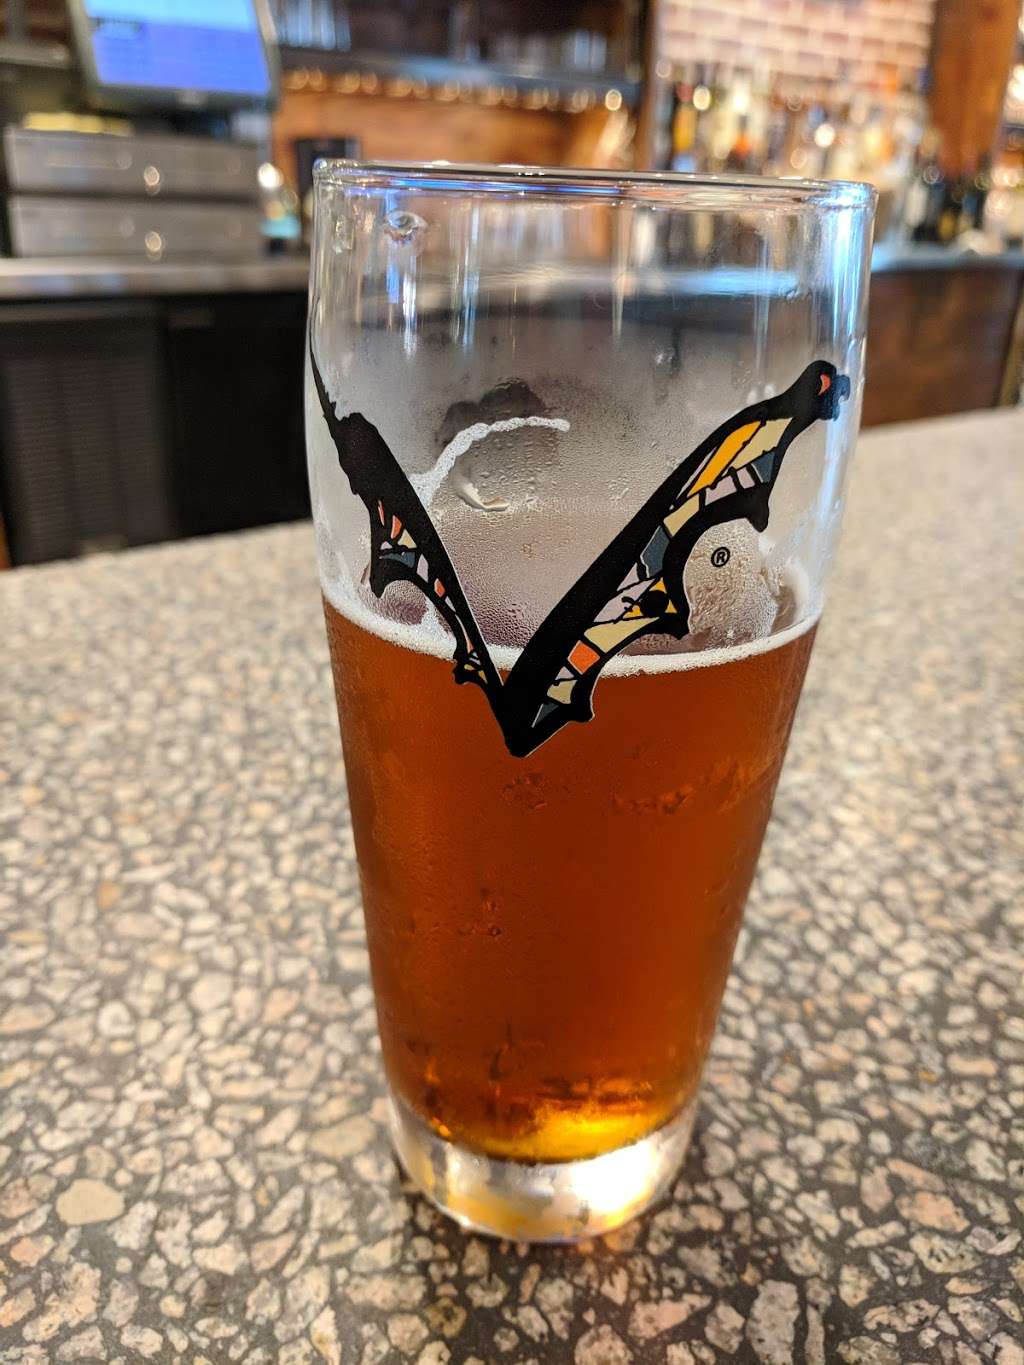 Flying Dog Tap House | BWI Airport, Terminal A, 5, MD 21240 | Phone: (410) 684-6723